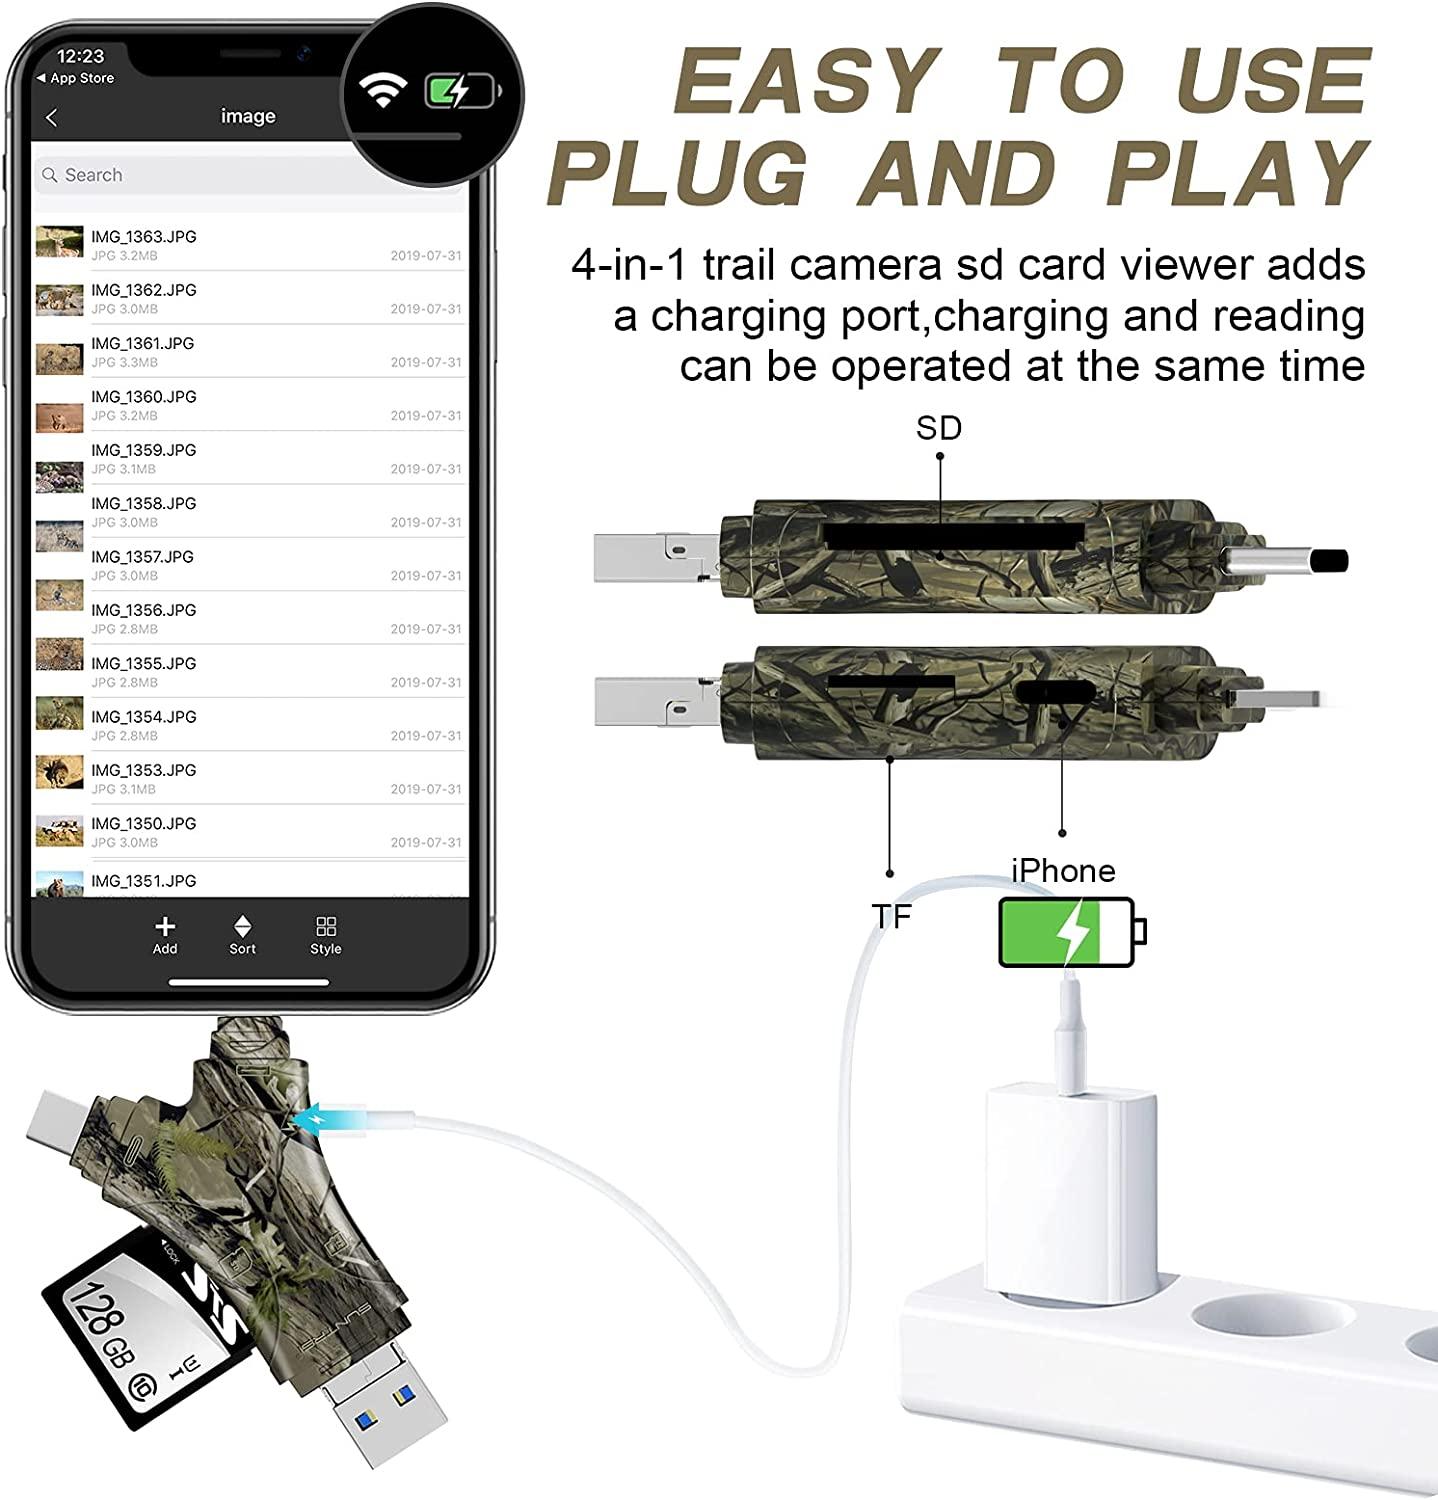 Sd Card Reader Compatible With Iphone Ipad 3 In 1 Memory Card Reader Plug  And Play Micro Sd Card Reader Sd Card Adapter Portable Trail Camera Viewer  S